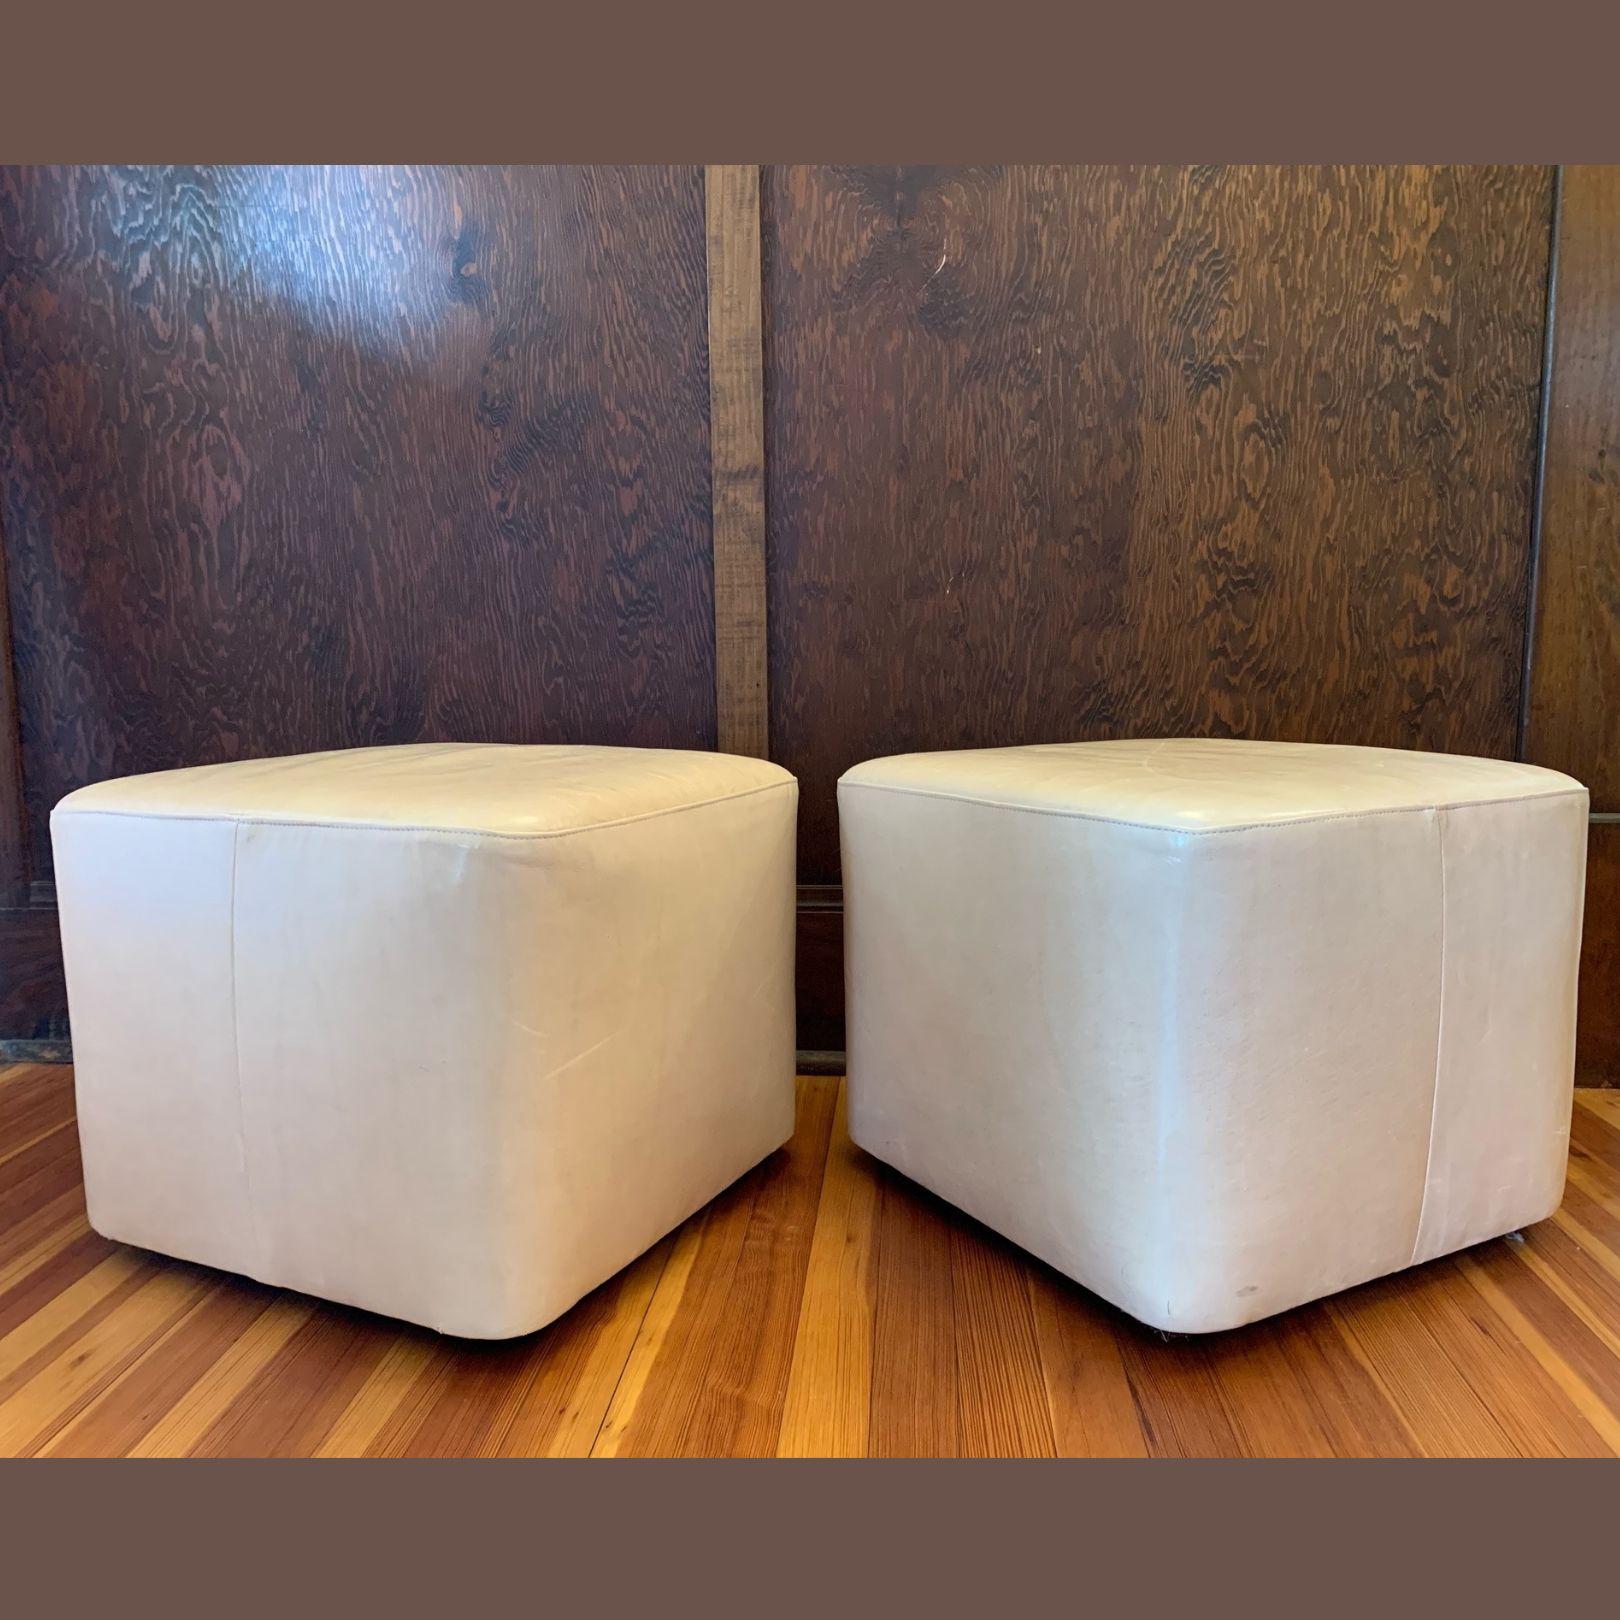 This contemporary pair of buttery-soft leather ottomans can be used either as extra seating or a comfortable foot rest in a living room, bedroom, or den. Done in a cream-colored, almost pink leather, each seat sits on four recessed brass castors,